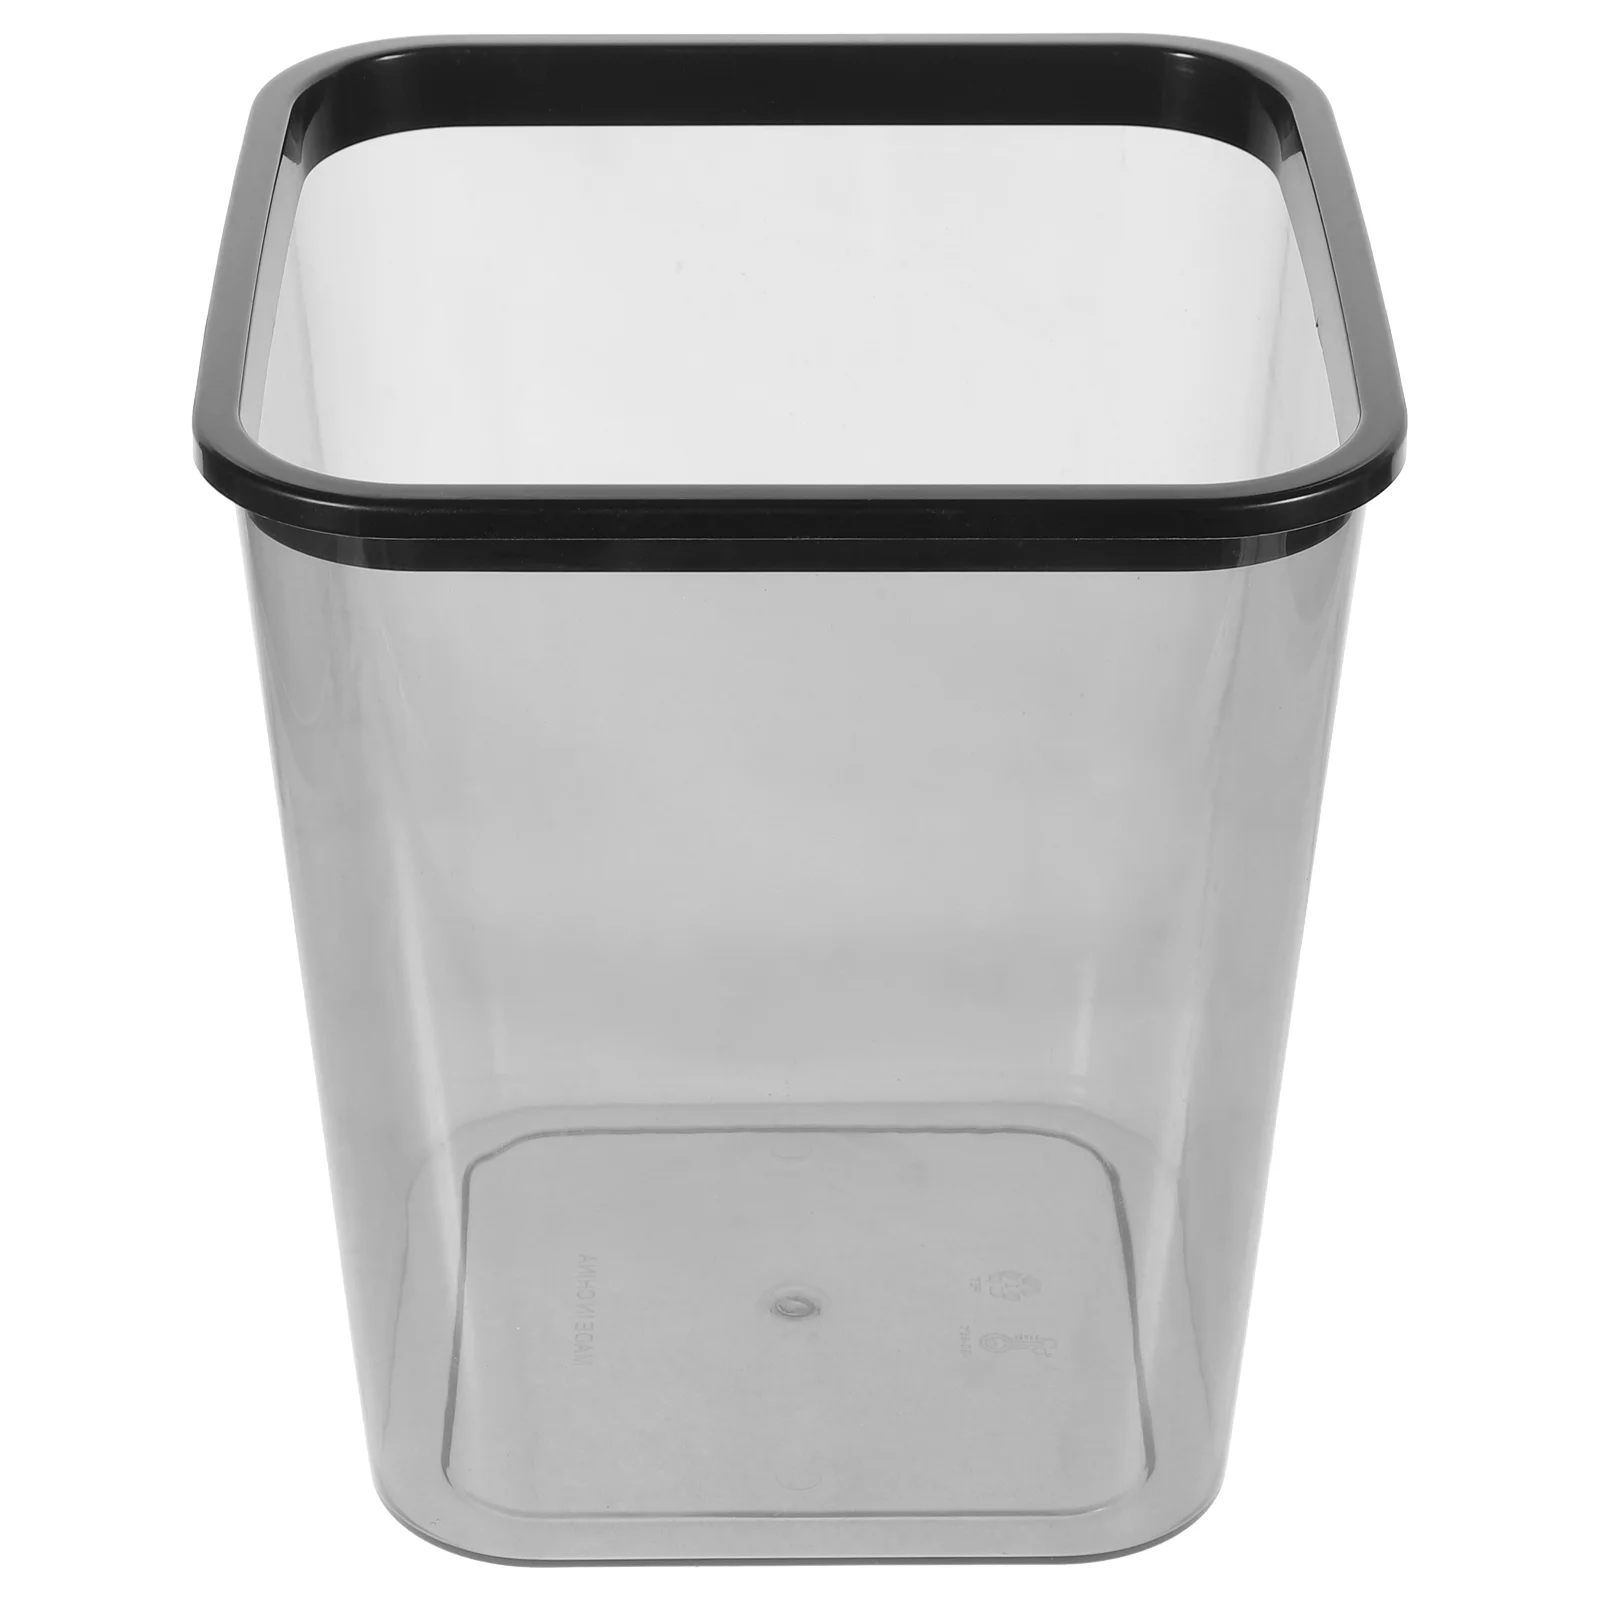 

Trash Can Classified Large Cans Garbage For Bedroom Bathroom Waste Paper Basket Plastic Office